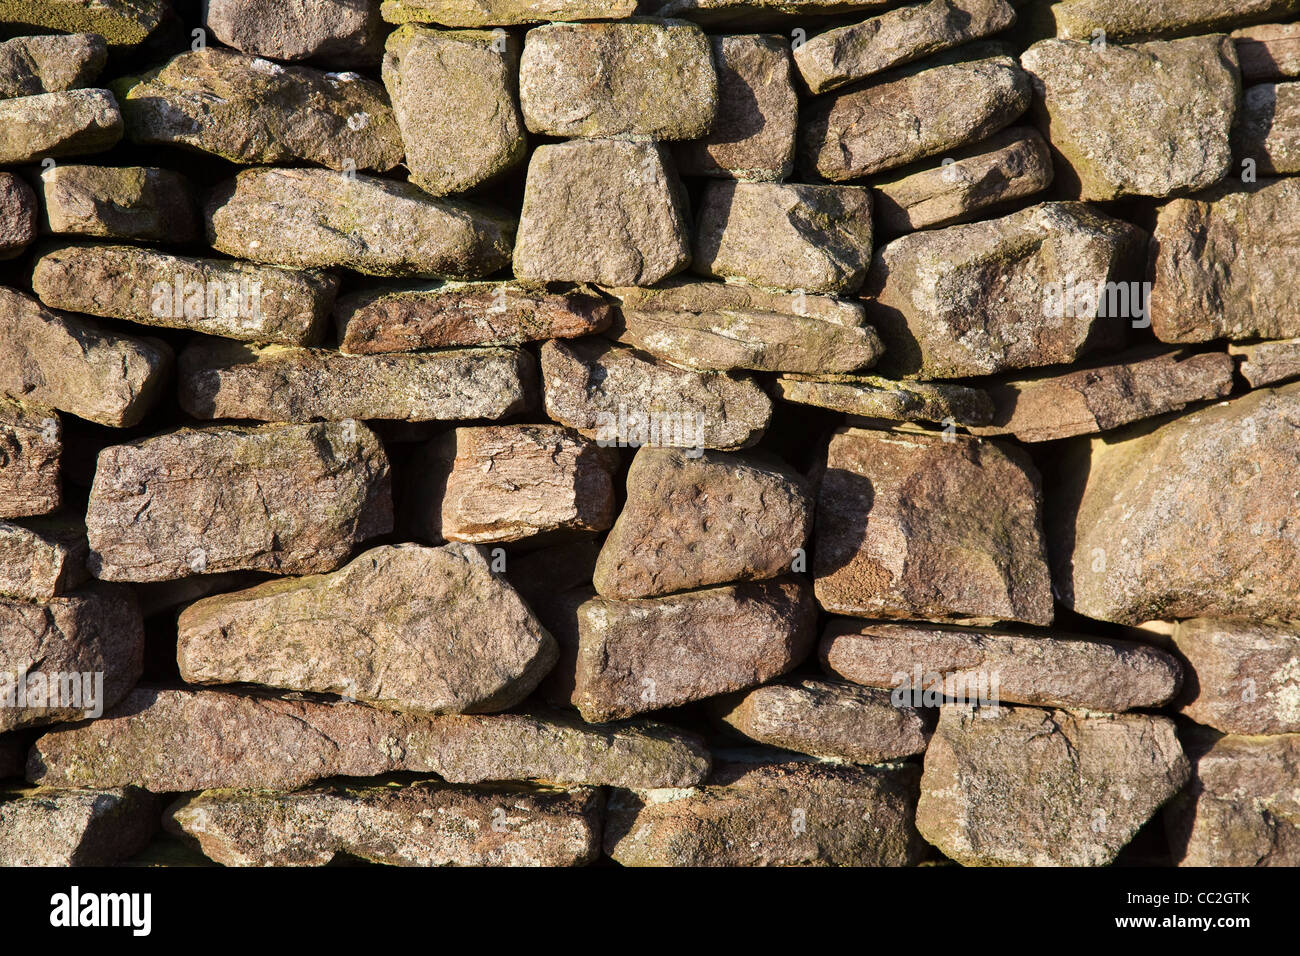 Dry Stone Wall or Dykes  Stone Construction and placings  Close-up Stock Photo